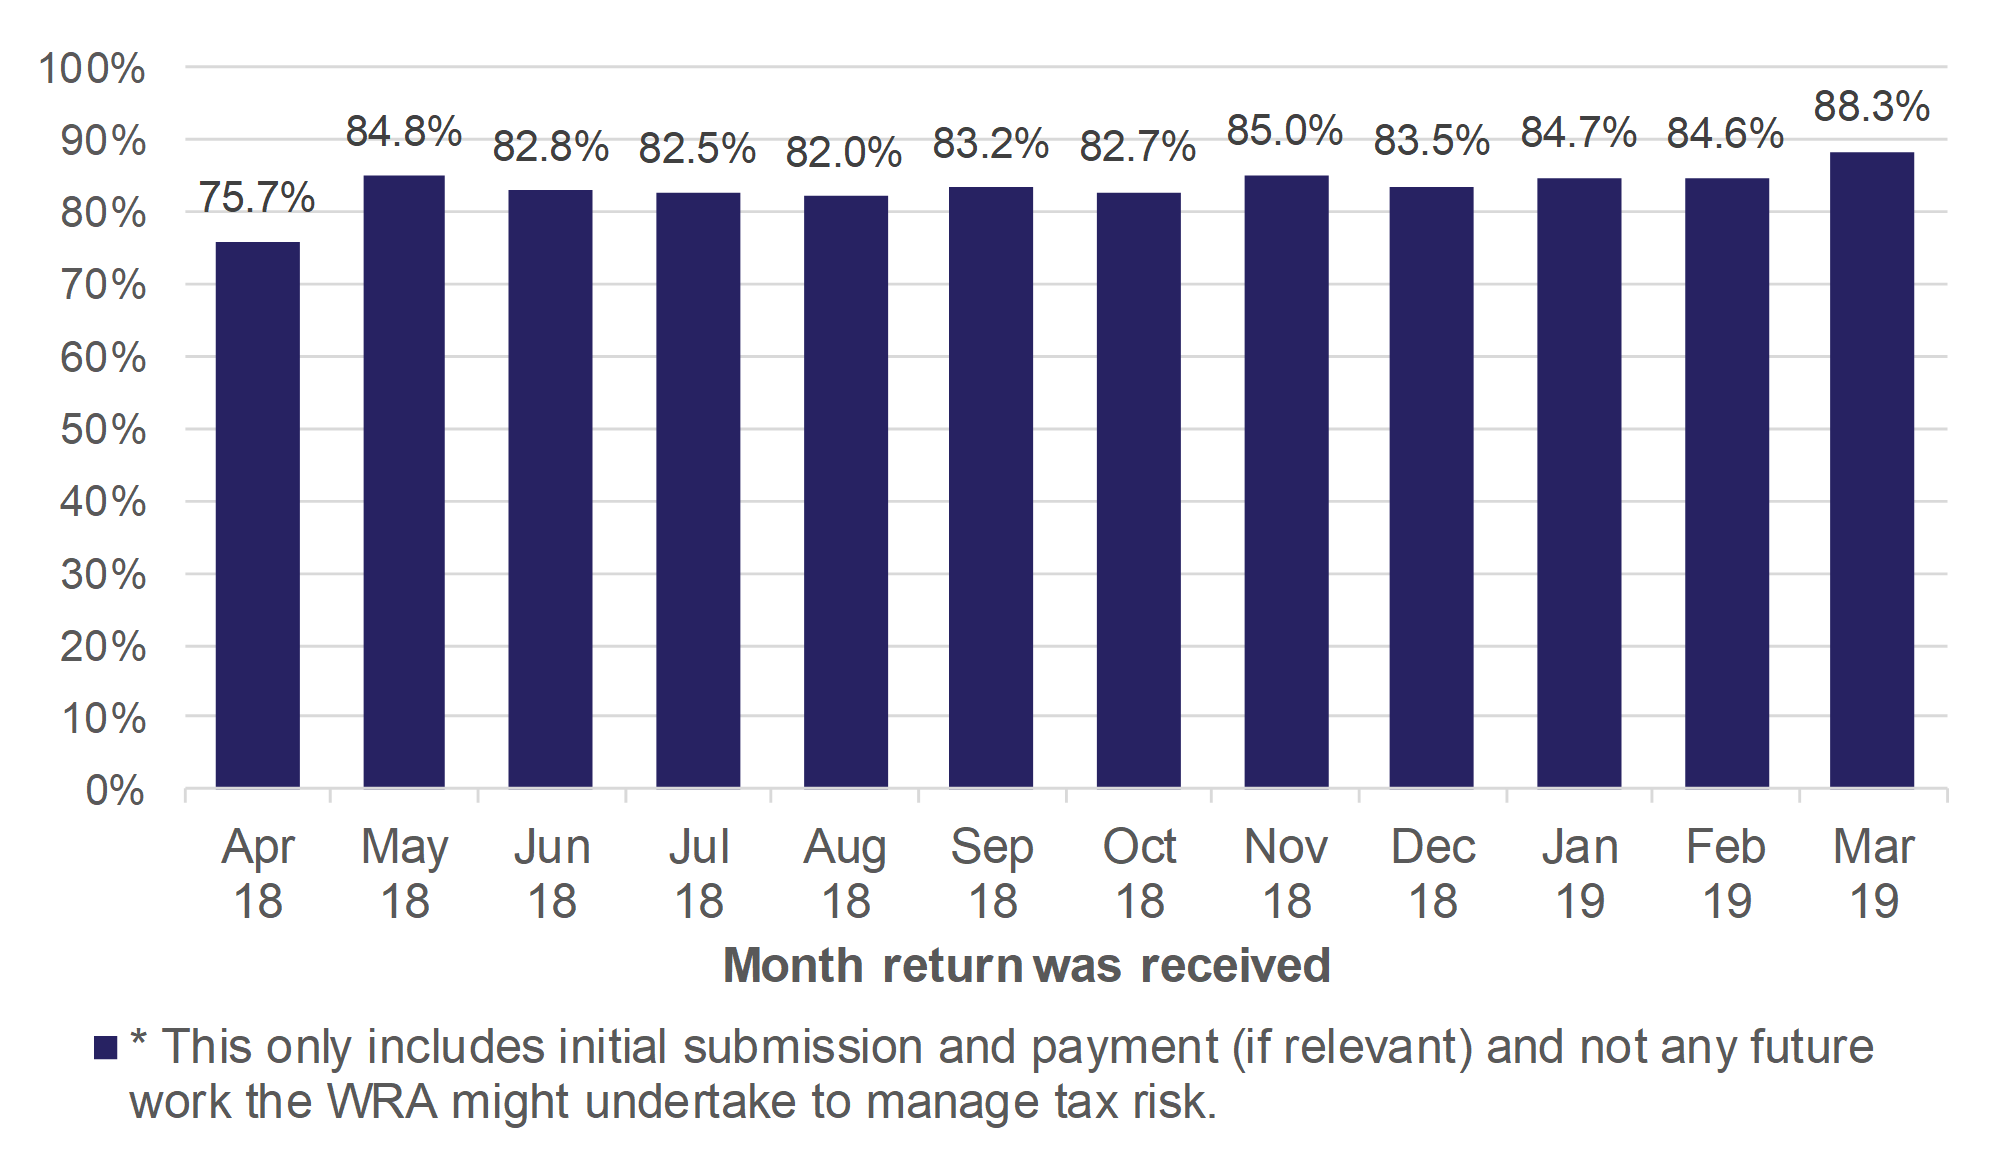 Figure 10.5 shows monthly trends in the percentage of transactions that automatically progress to initial closure with no WRA intervention, for returns received in April 2018 to March 2019.